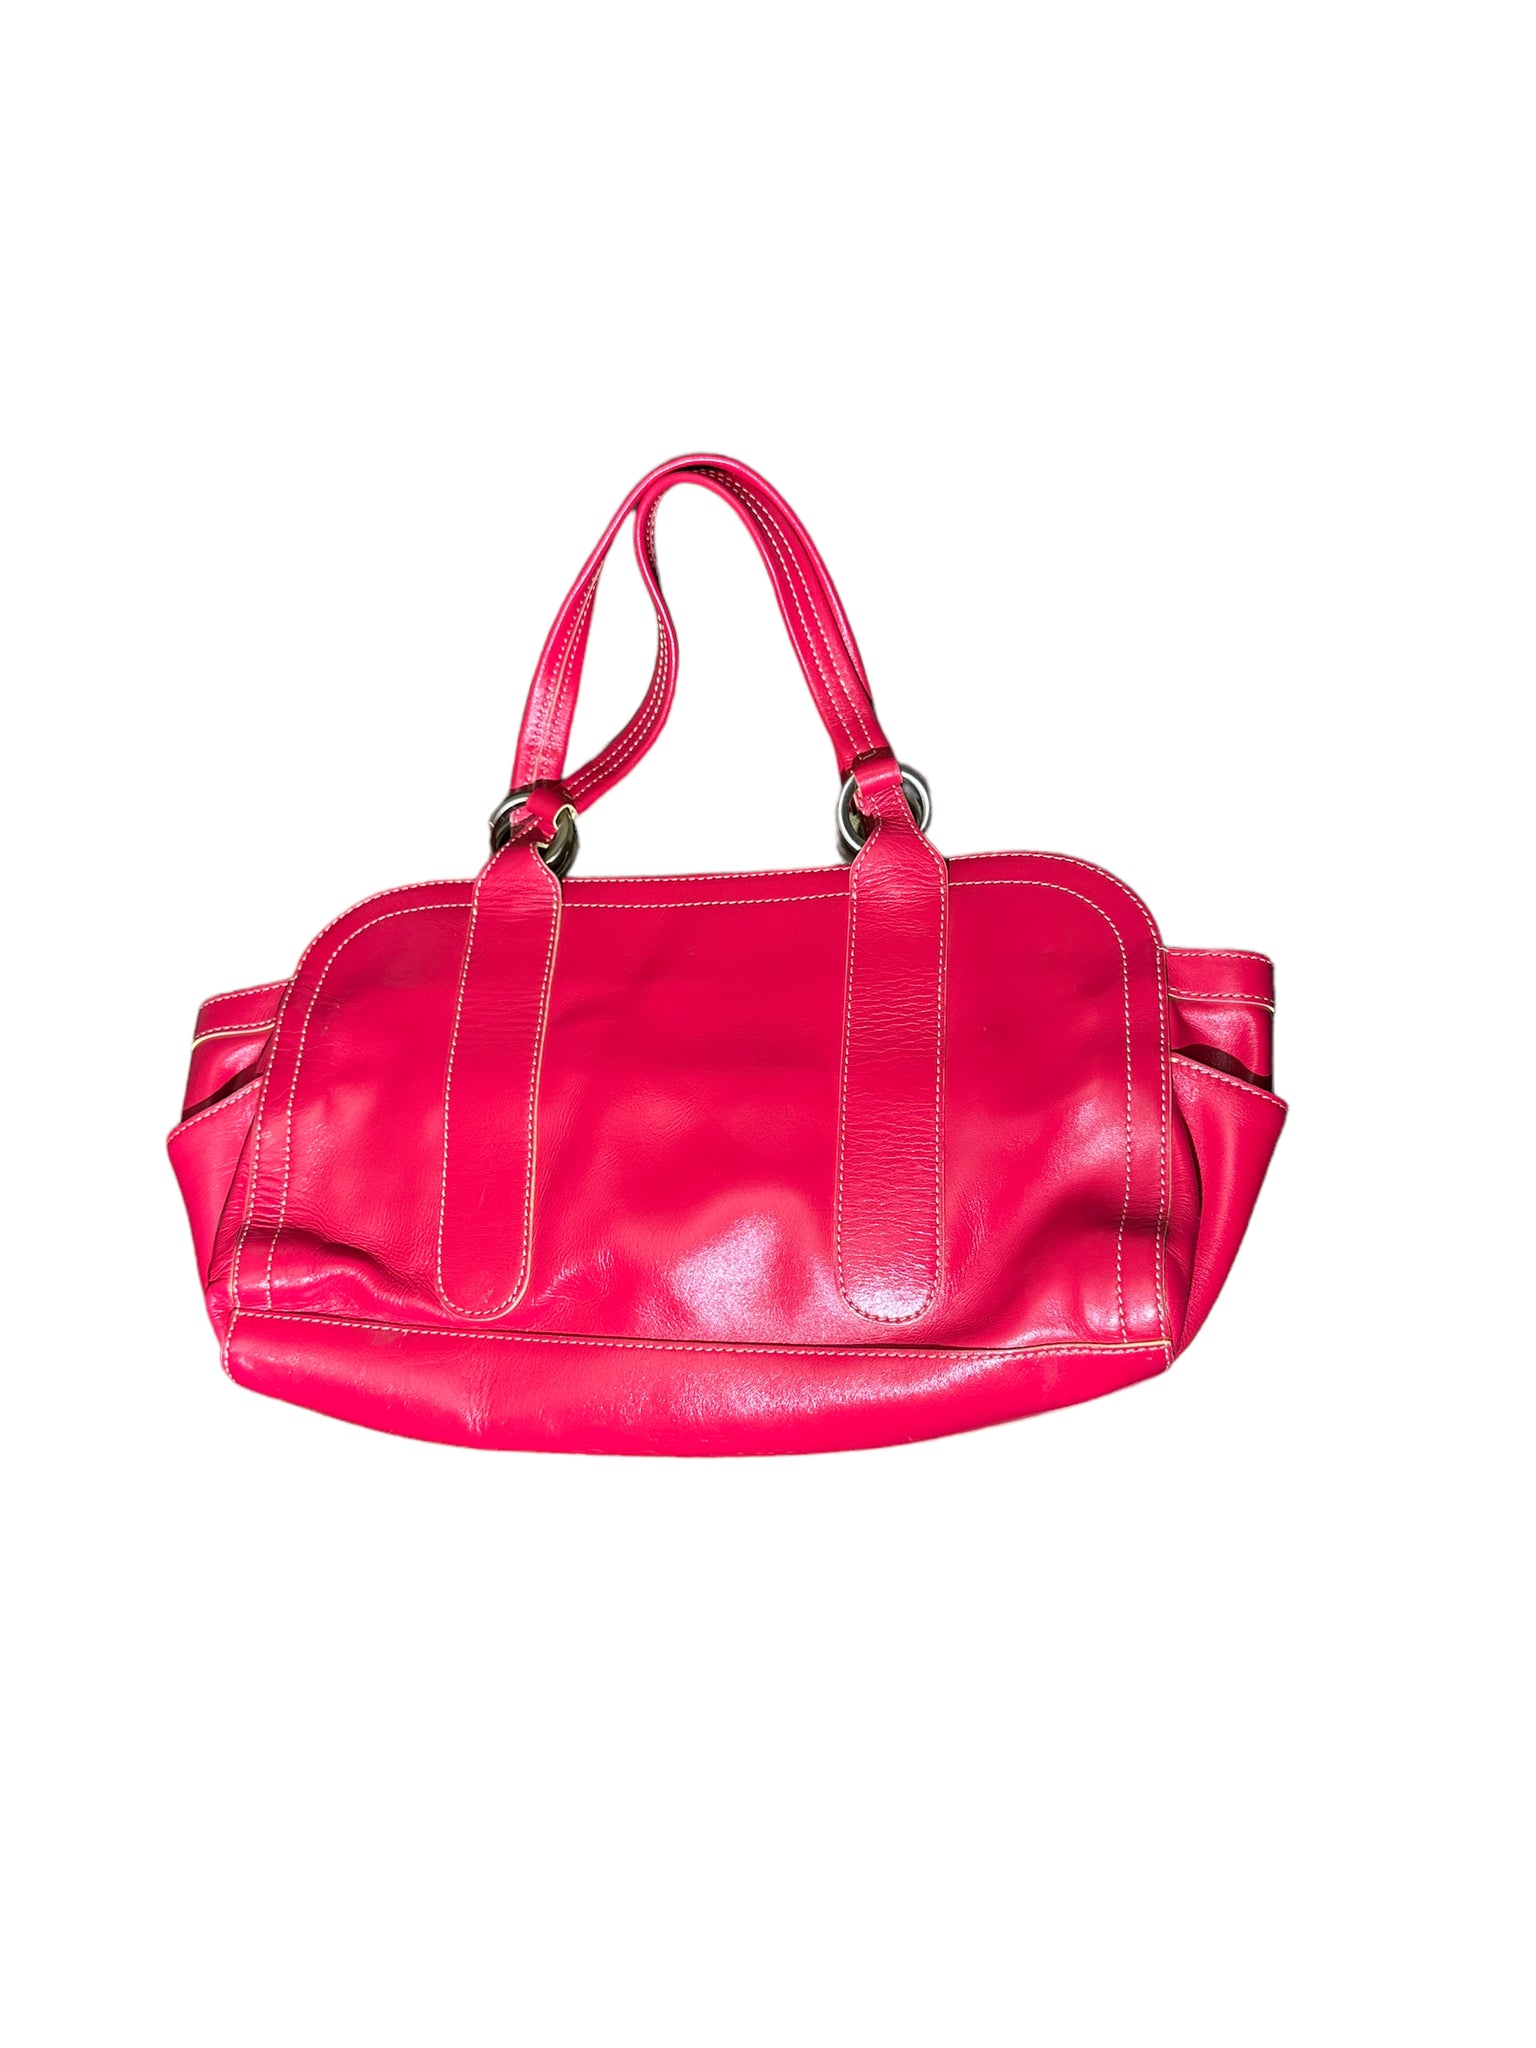 Red Leather Handbag With Zippers